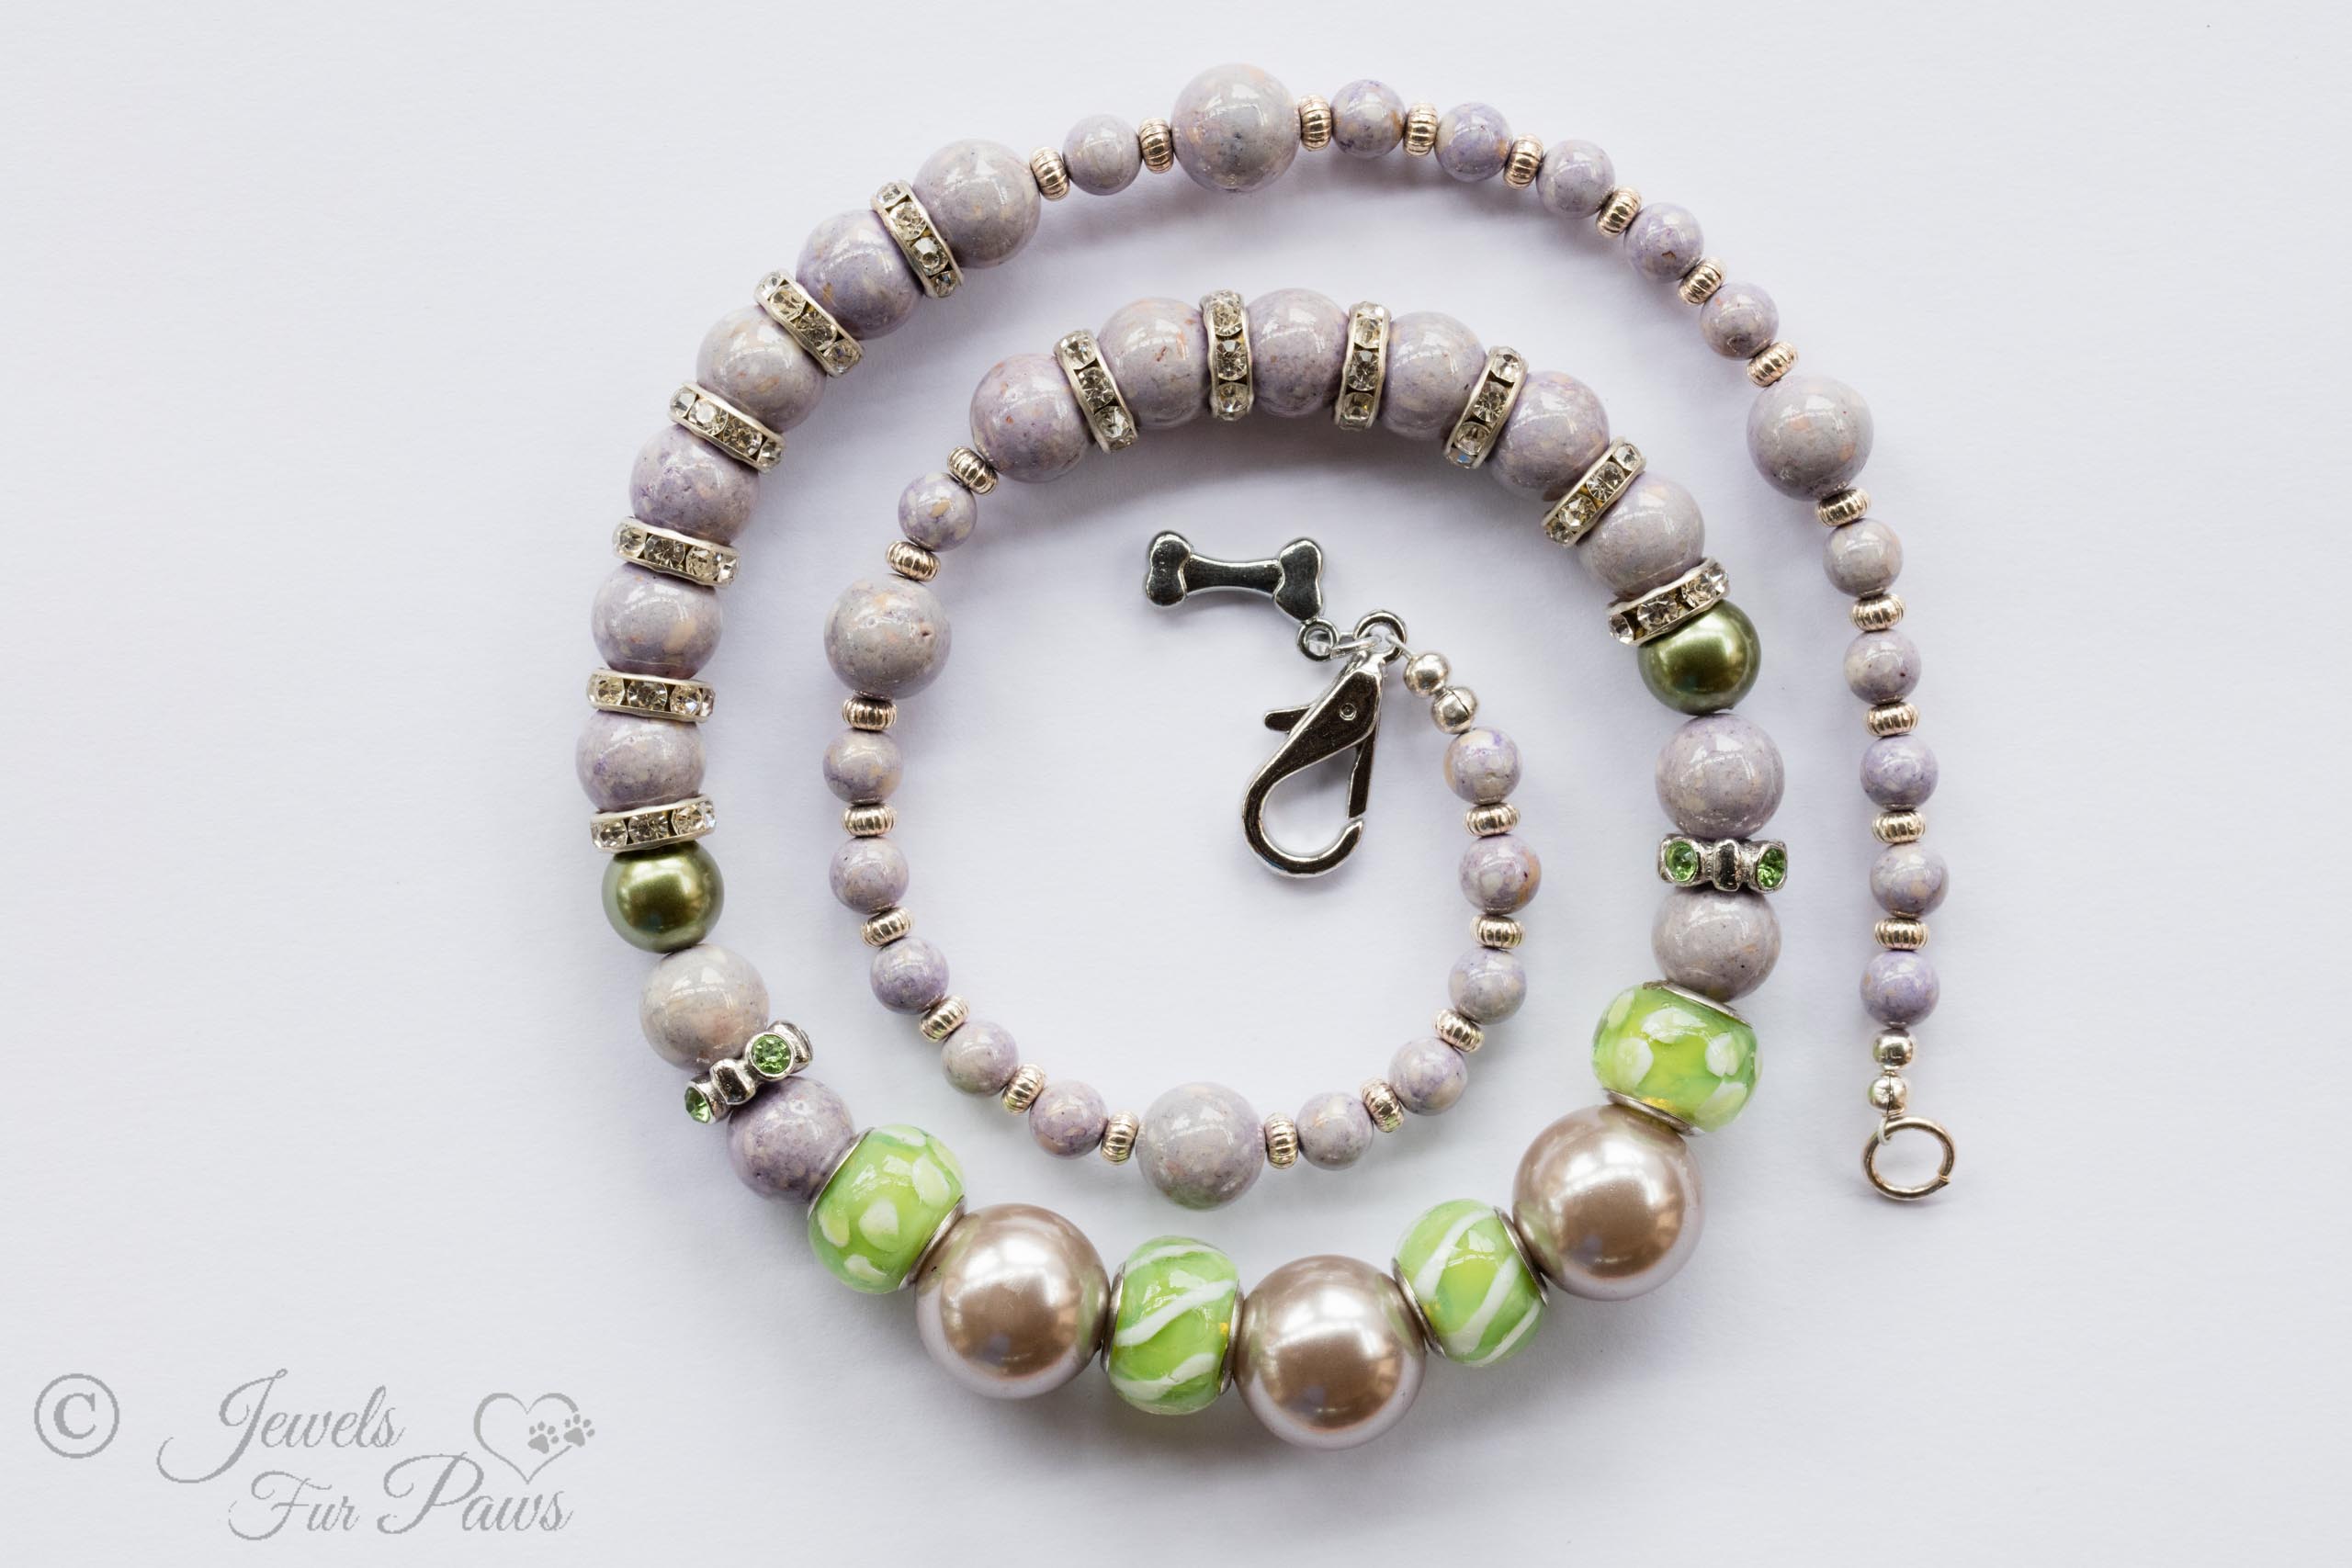 three large iridescent lavender silver pearl beads with green glass beads with swarovski channel set spacers and lavender beads on white background